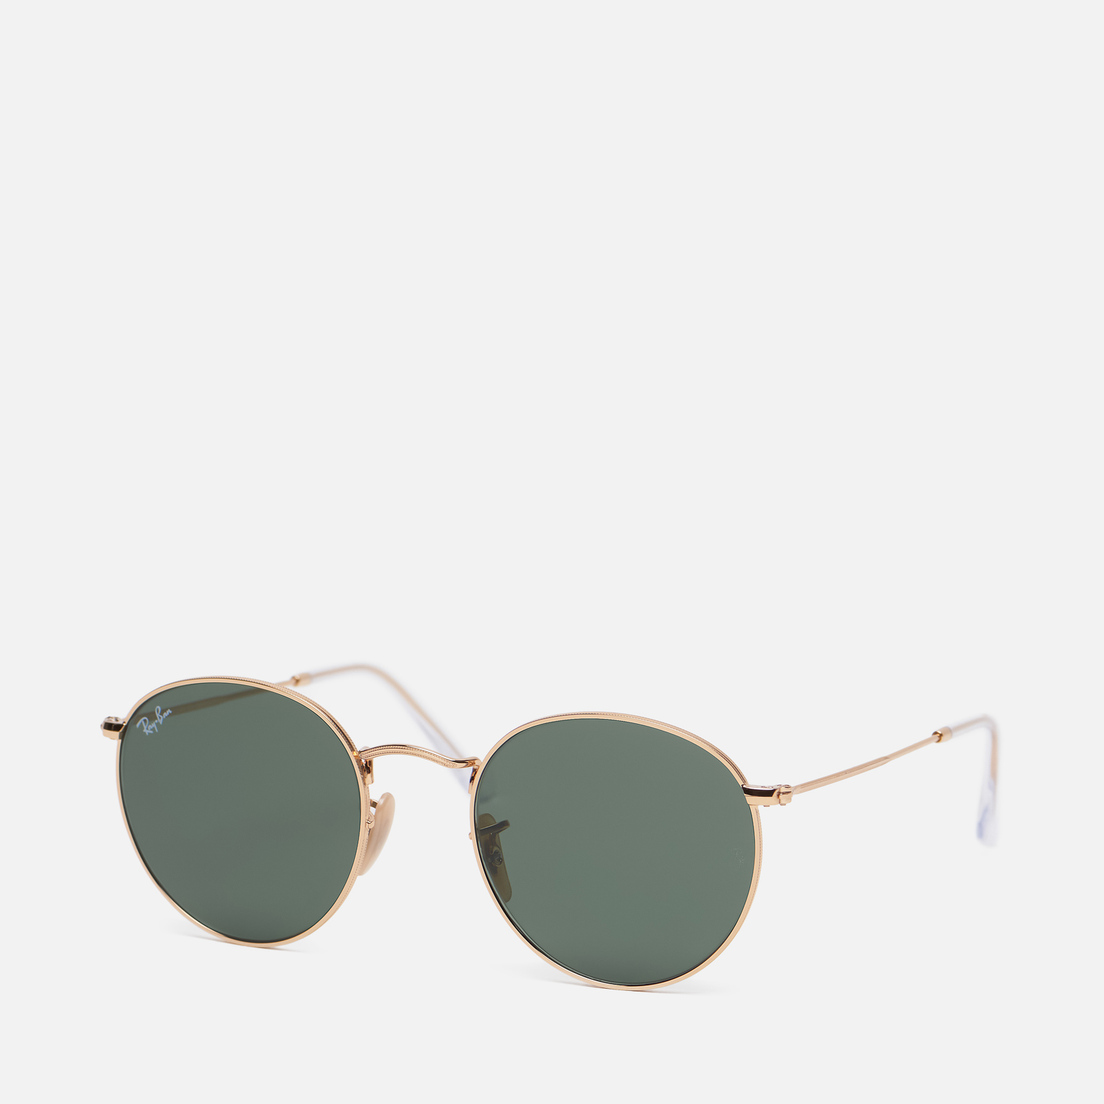 ray ban round green gold